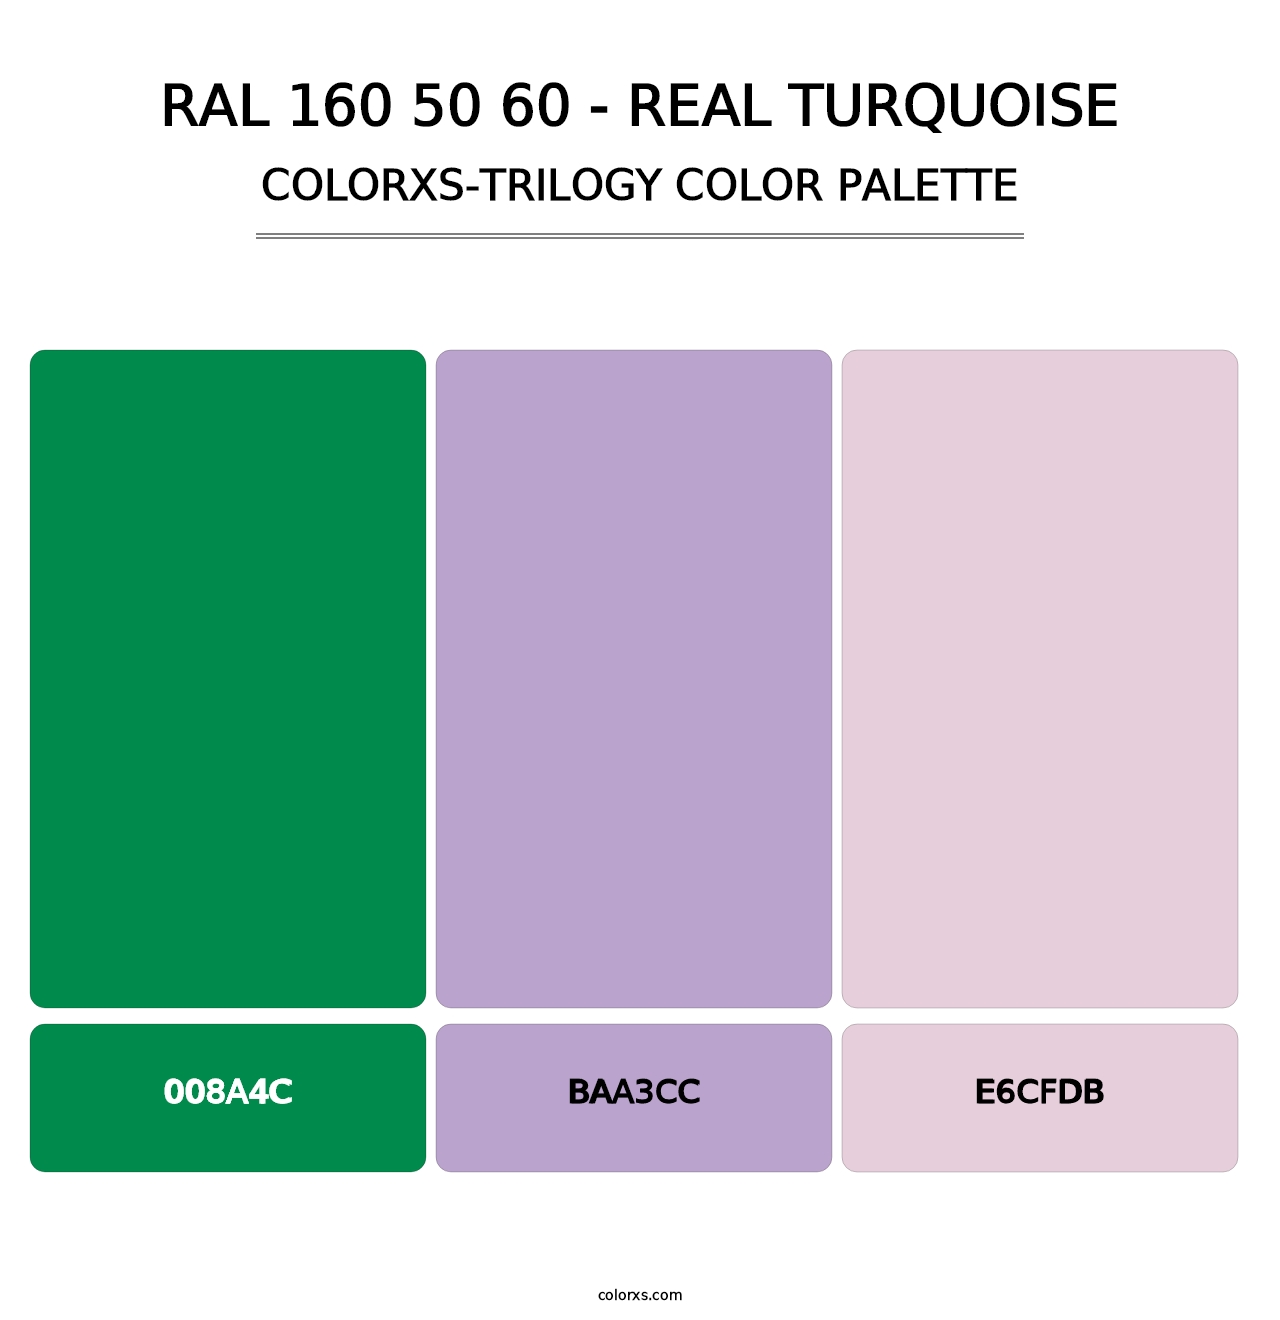 RAL 160 50 60 - Real Turquoise - Colorxs Trilogy Palette